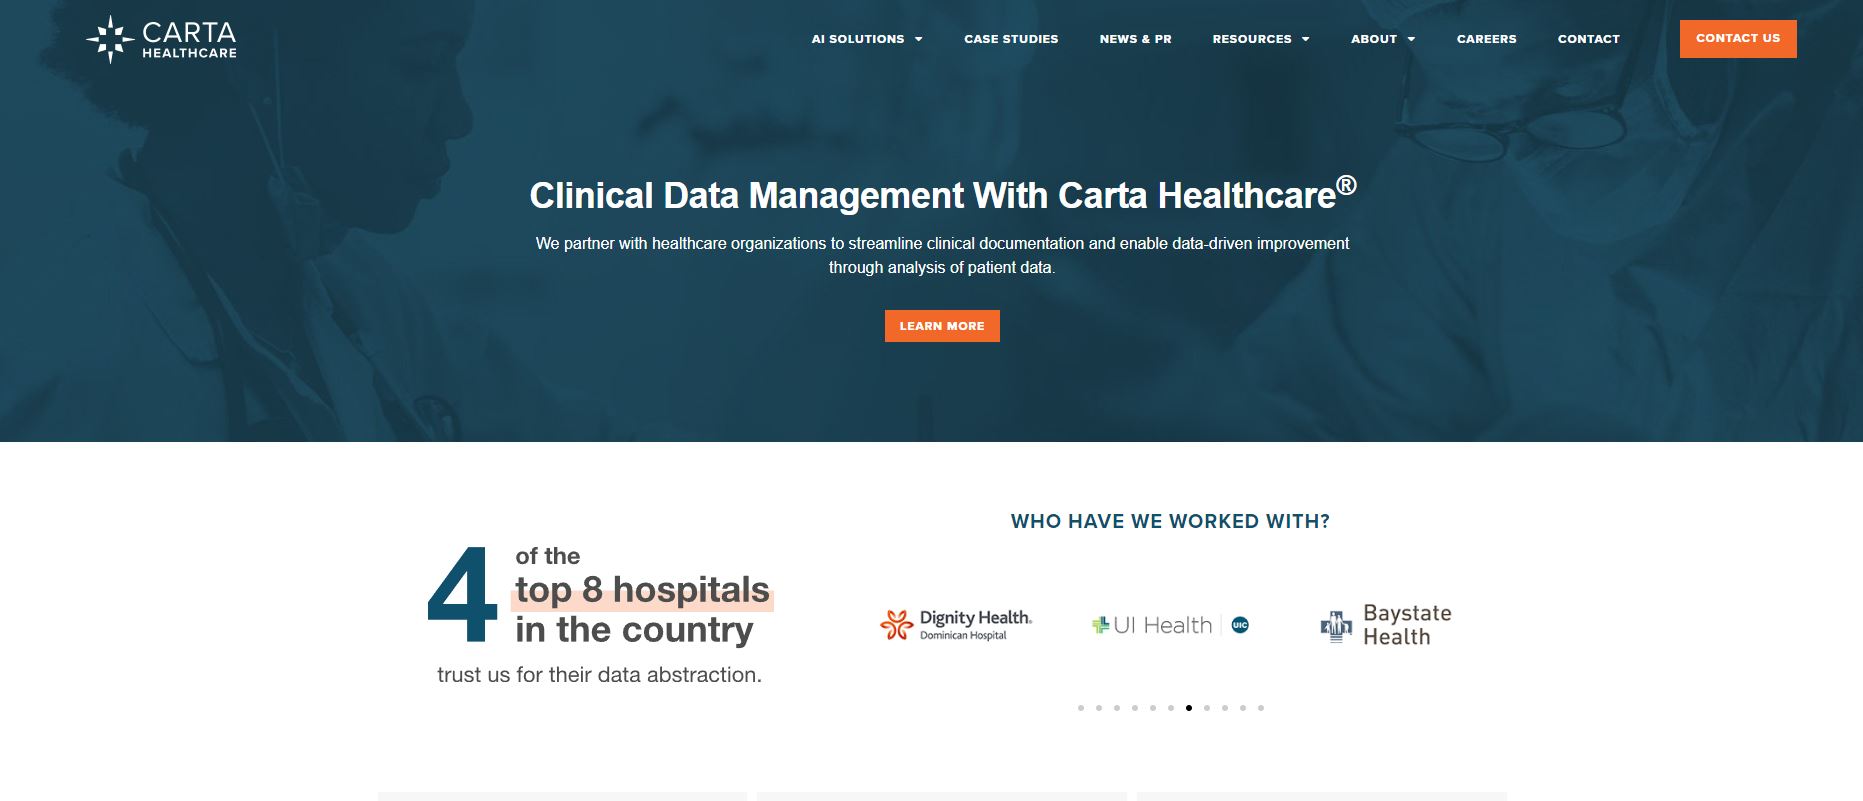 With an impressive $25M raised in Series B funding, Carta Healthcare is revolutionizing clinical data management and driving data-driven improvements in healthcare organizations